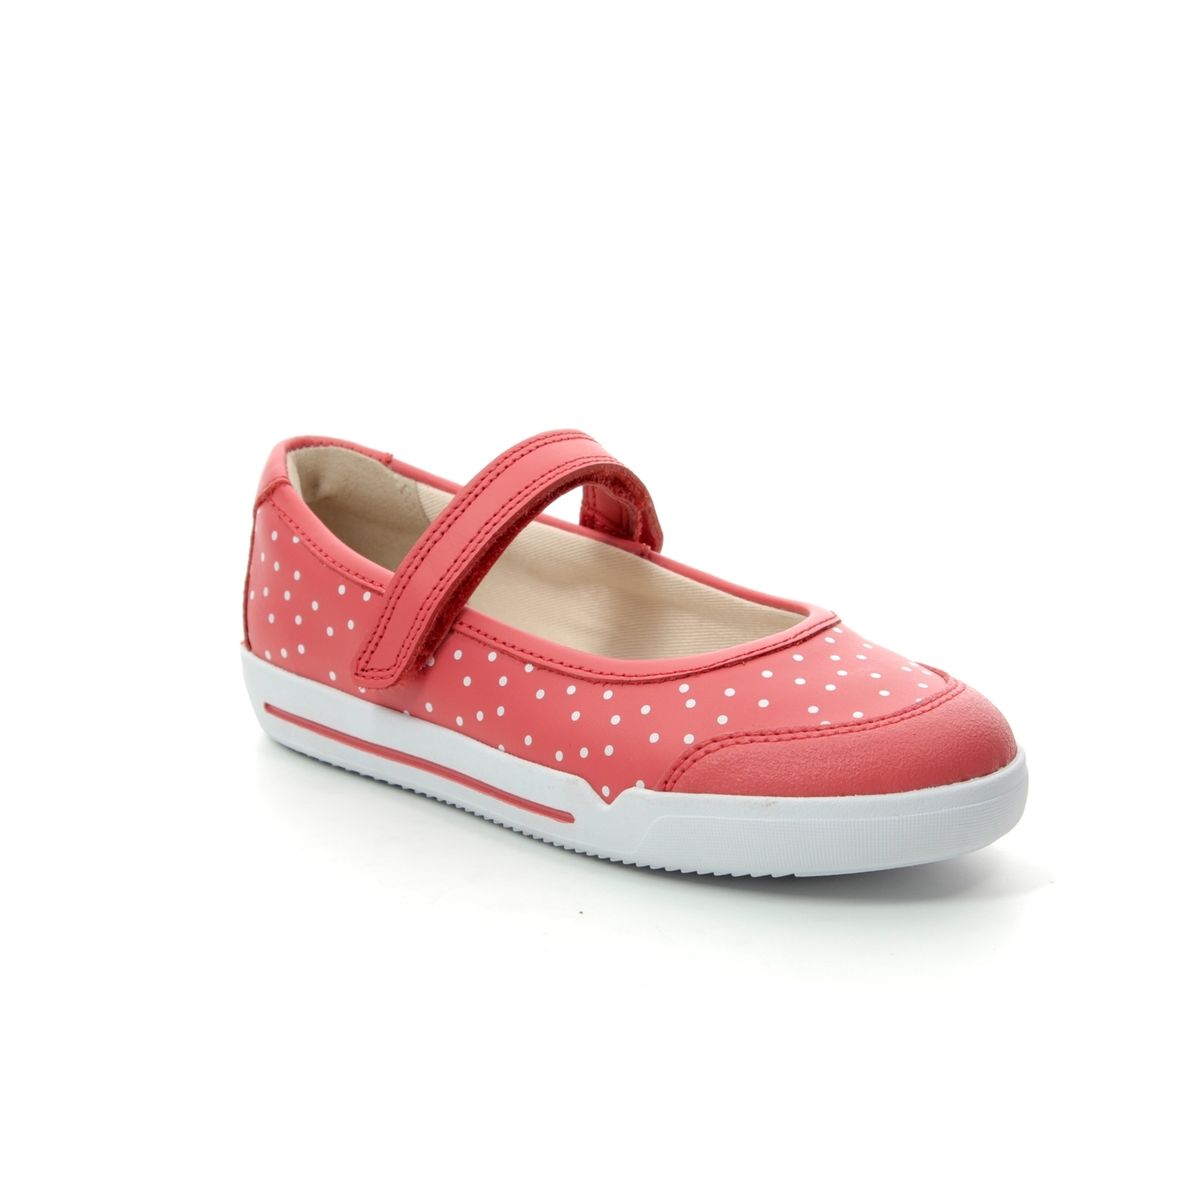 coral toddler shoes